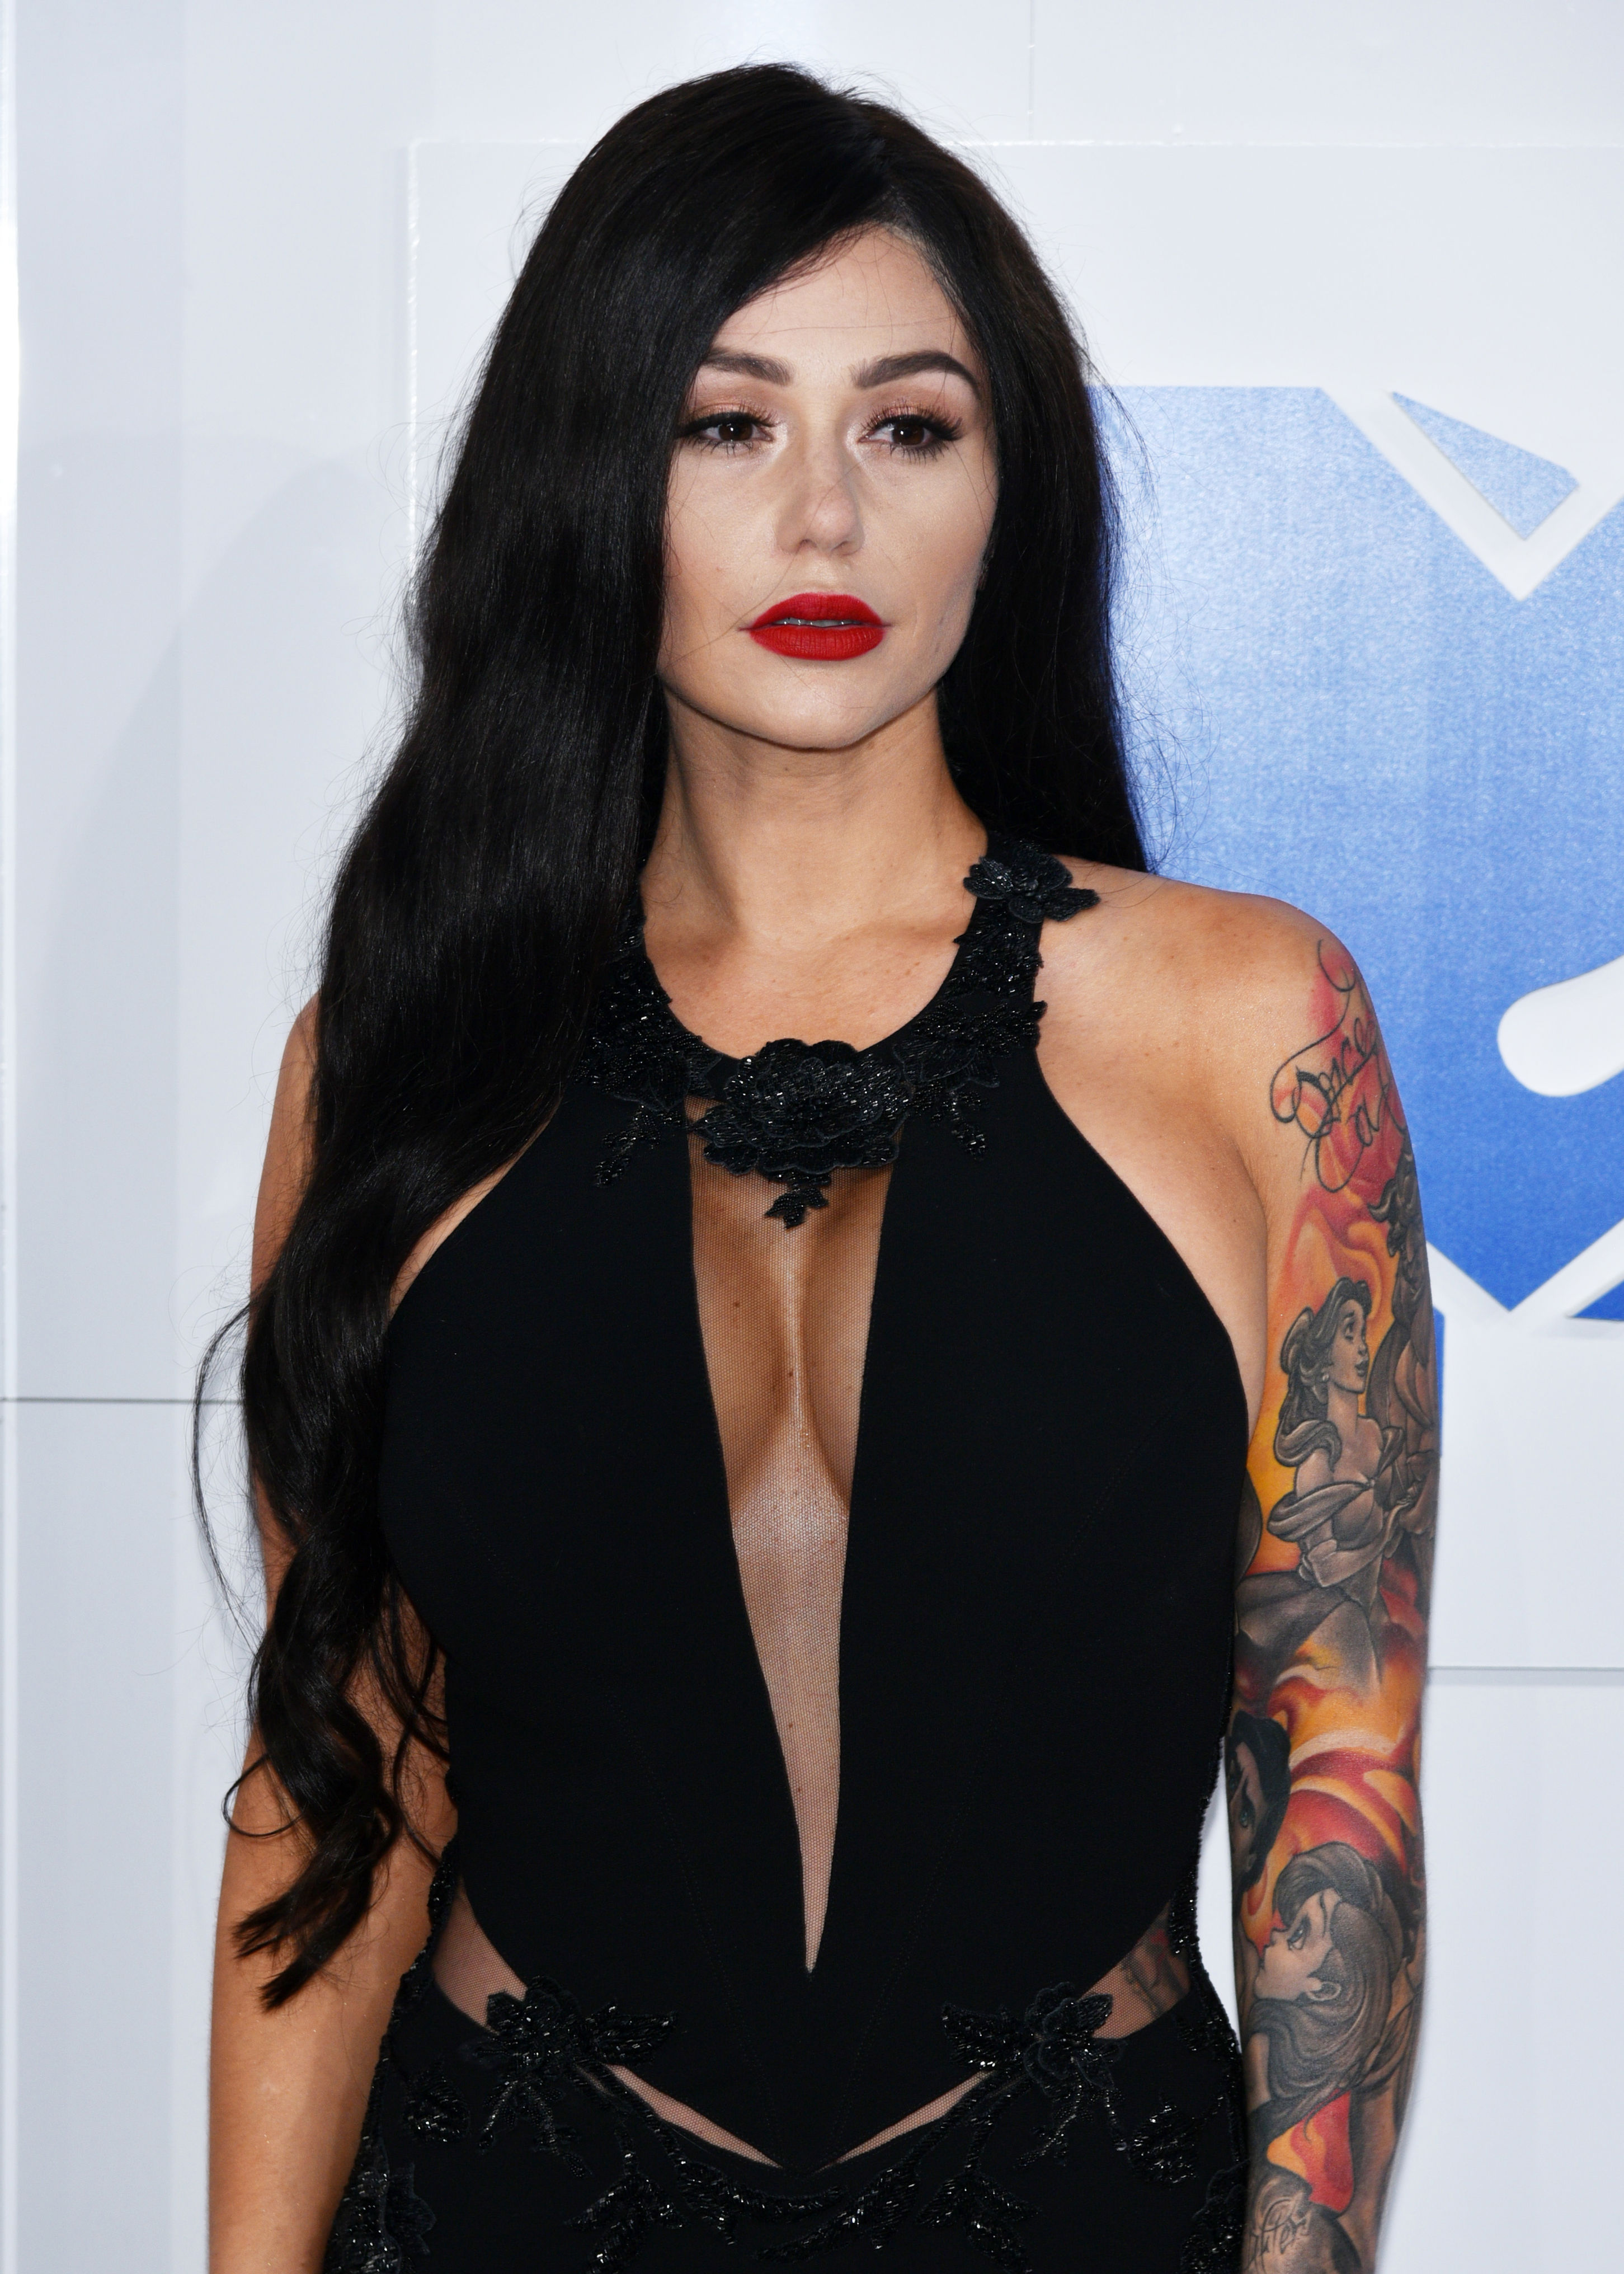 <p>Jenni Farley, who looked dramatically different during the 2016 MTV VMAs, got her second boob job in 2015 after welcoming her first child the year before. But JWoww denies she'd had any work done to her face, attributing the changes in her looks to makeup, weight loss and tans.</p>